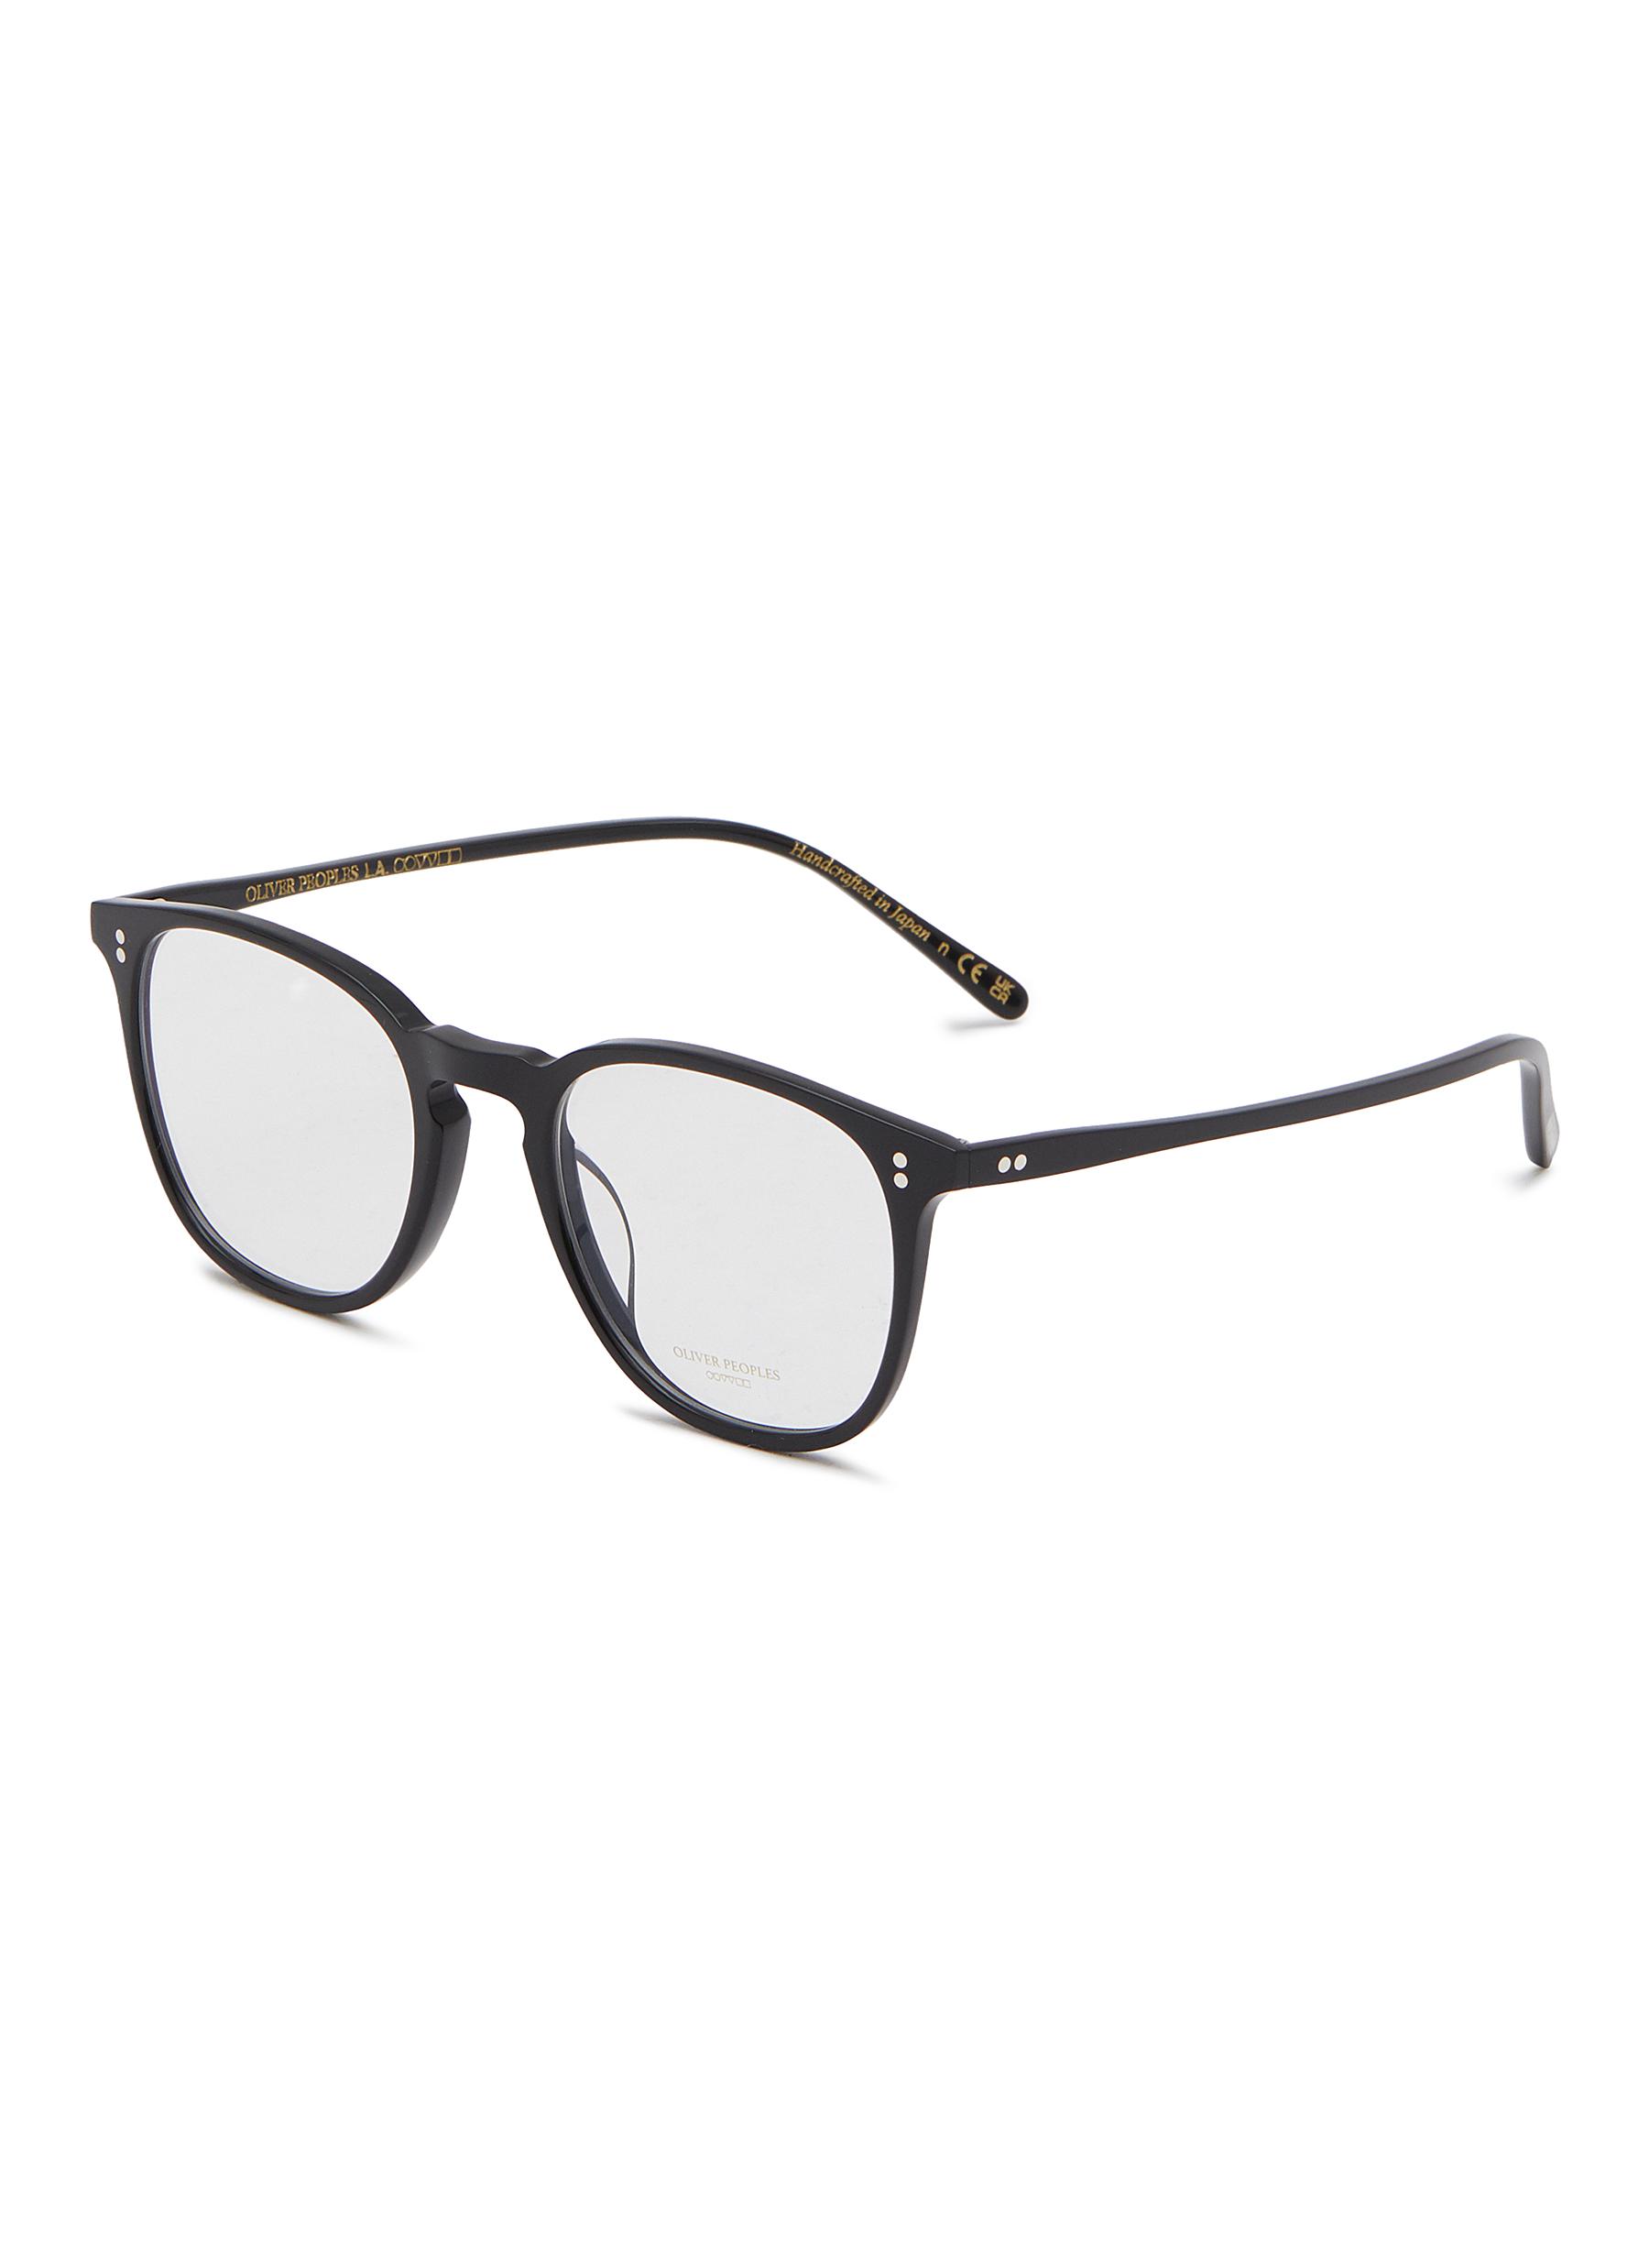 OLIVER PEOPLES ACCESSORIES Acetate Round Optical Glasses